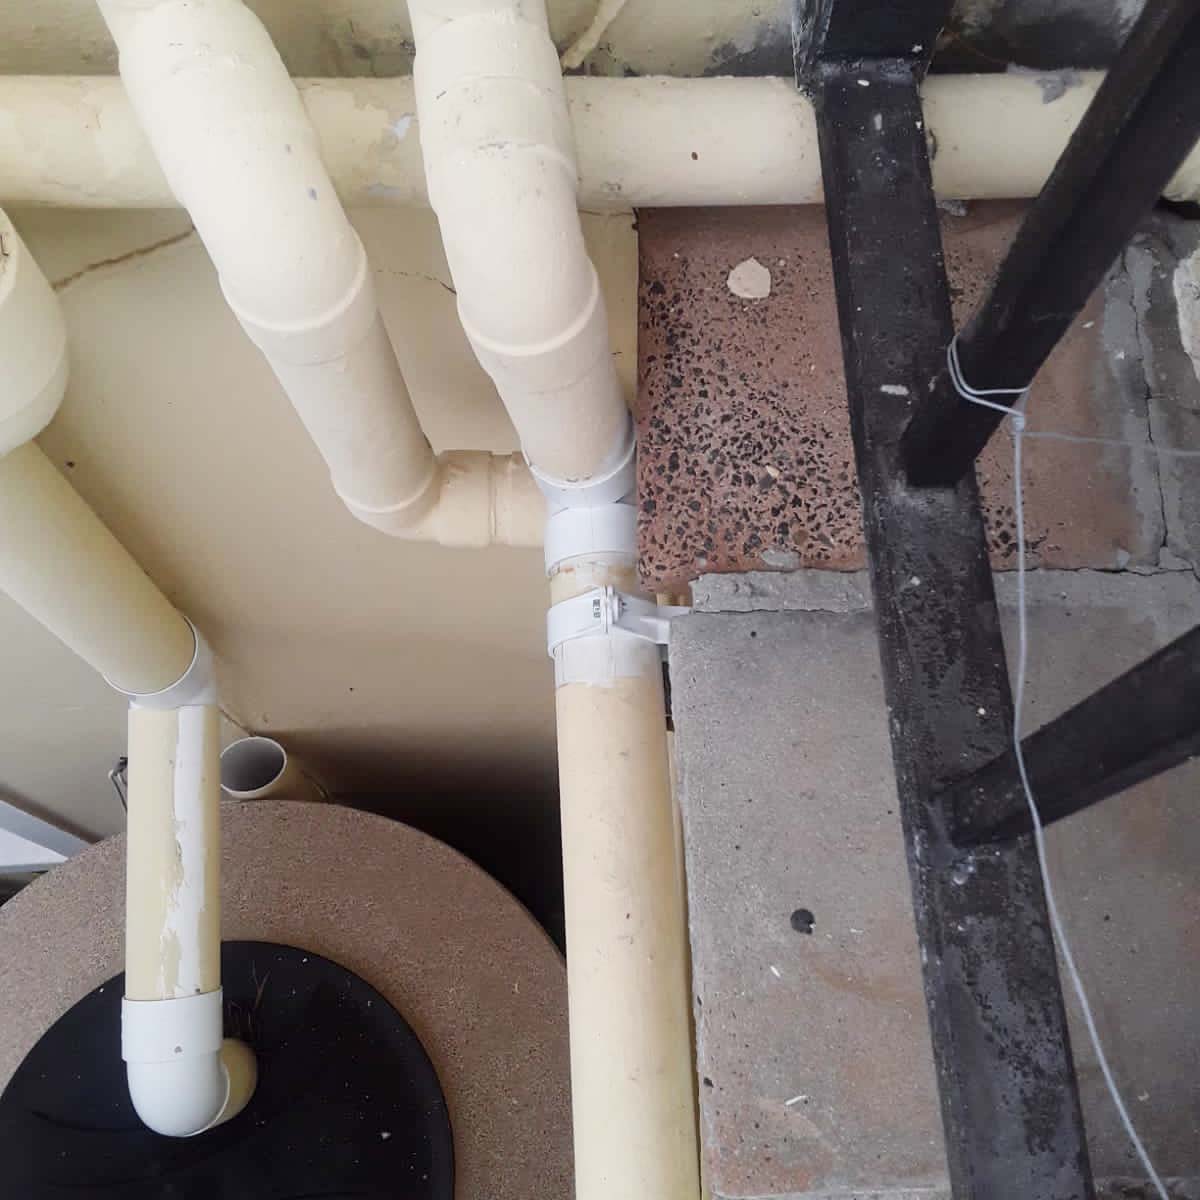 Leaking pool pipe? No worries, we've got you covered! Handyman Homes recently tackled a leaking pipe repair on a swimming pool in Hout Bay.

handymanhomes.co.za 

#HandymanHomes #PoolRepair #LeakingPipe #SwimmingPool #HoutBay #HomeMaintenance #QualityService